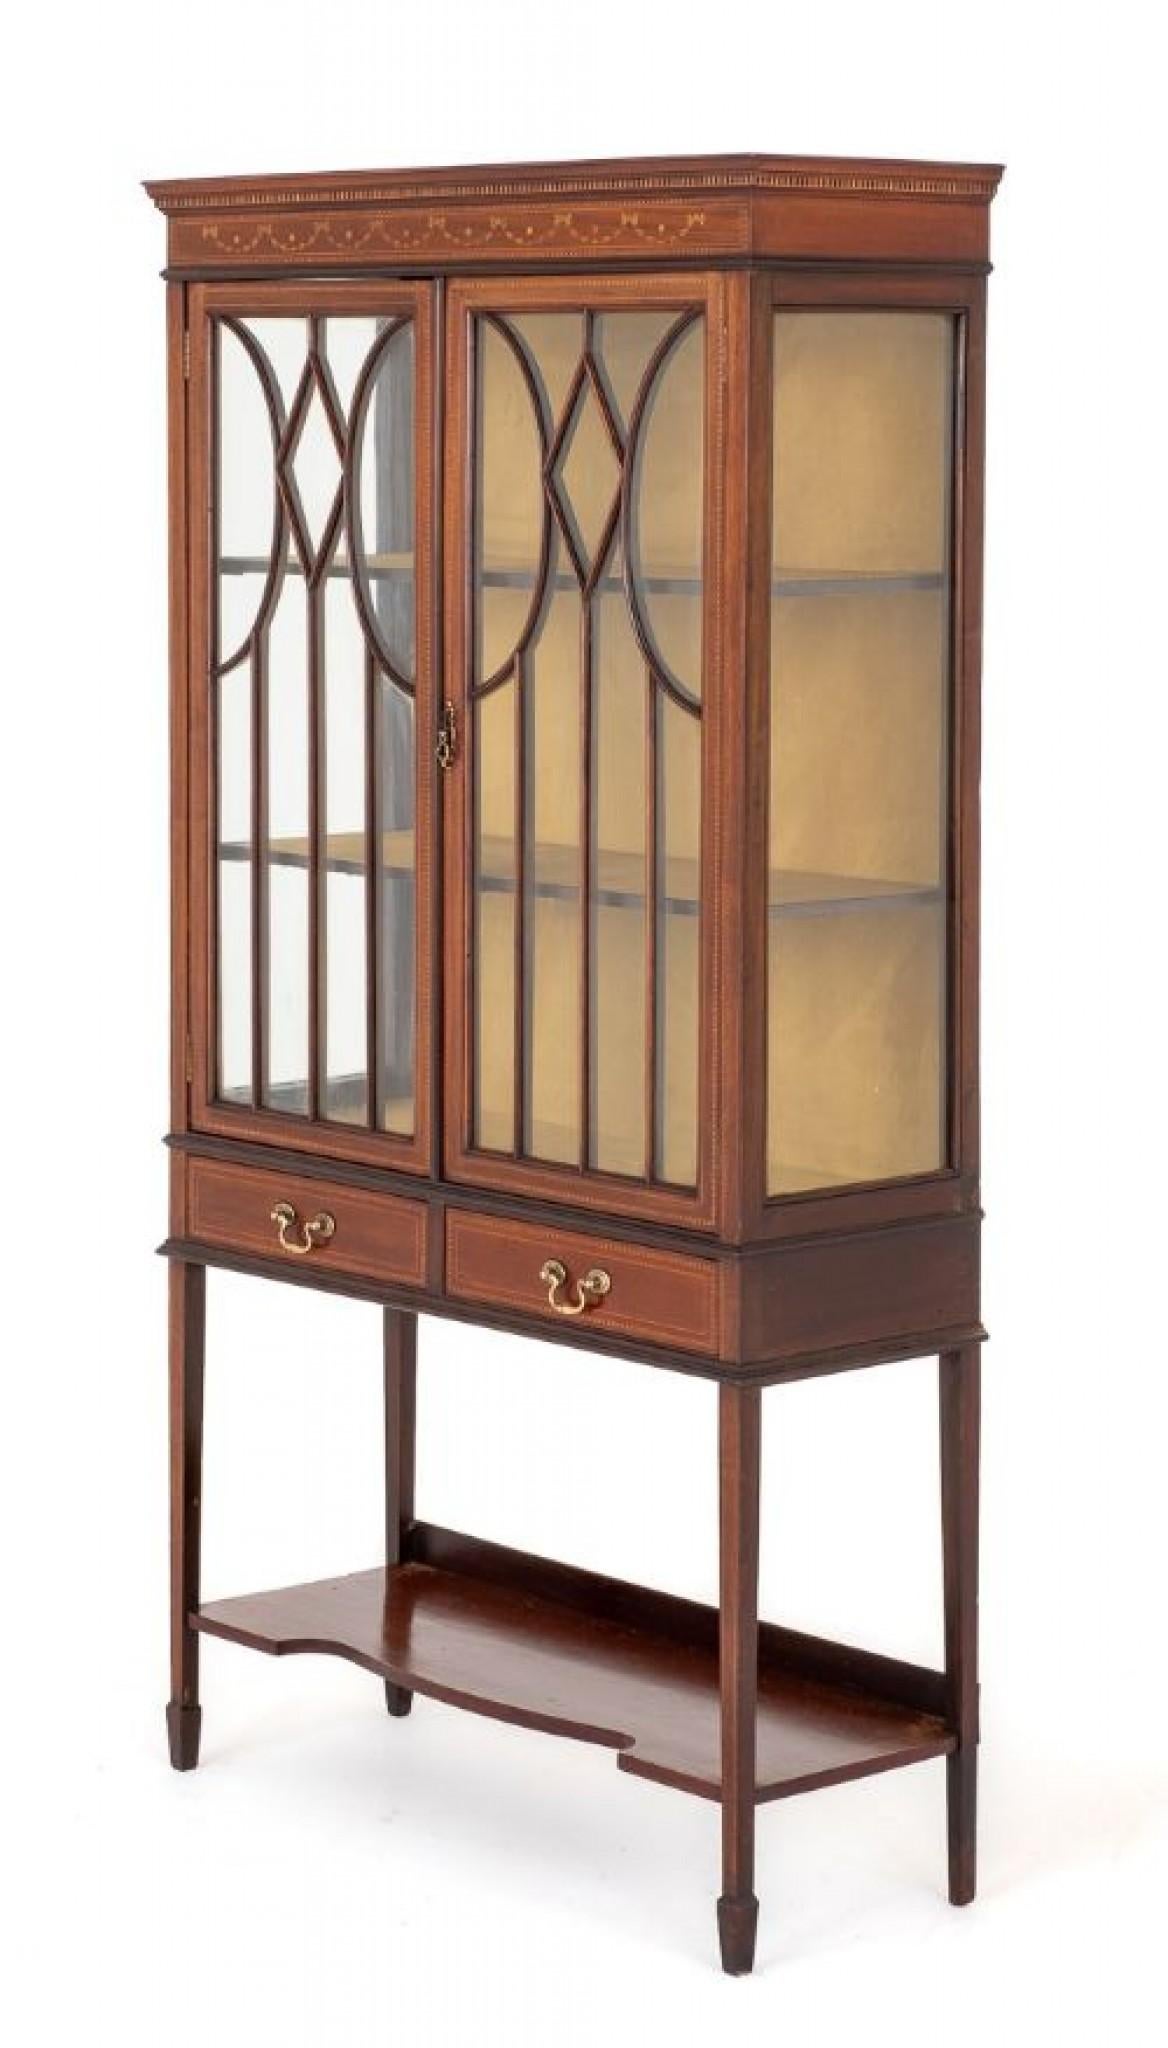 Late 19th Century Sheraton Display Cabinet Antique Bookcase 1880 For Sale